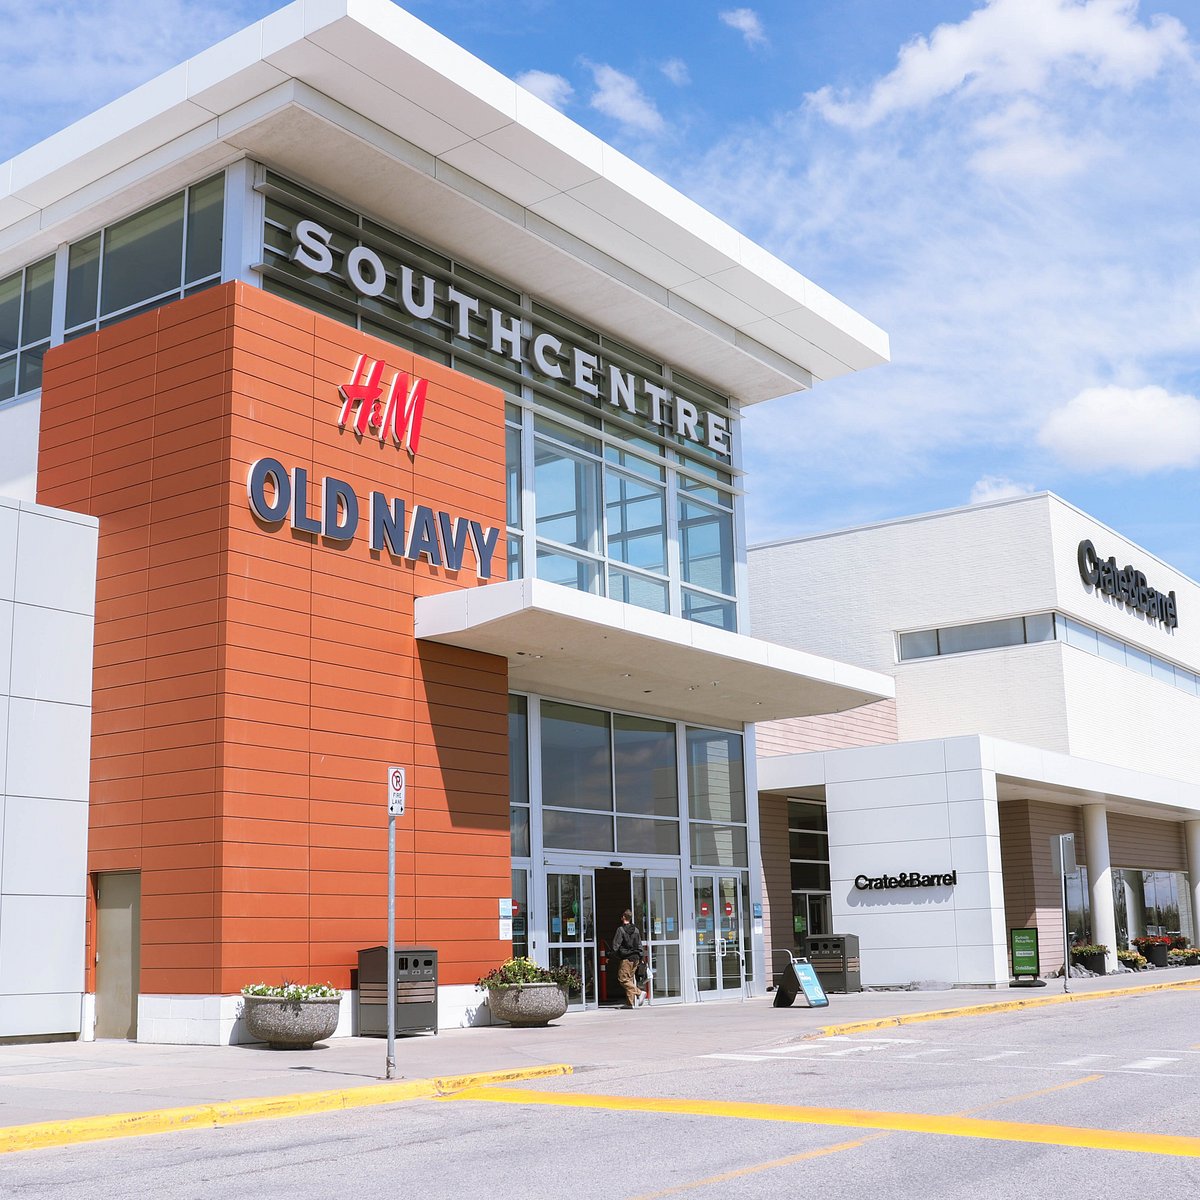 An image of the exterior of Southcentre mall. On the building, there are the logos of H&M, Old Navy and Crate&Barrel. The sky is blue with a few clouds and it's a very sunny day.